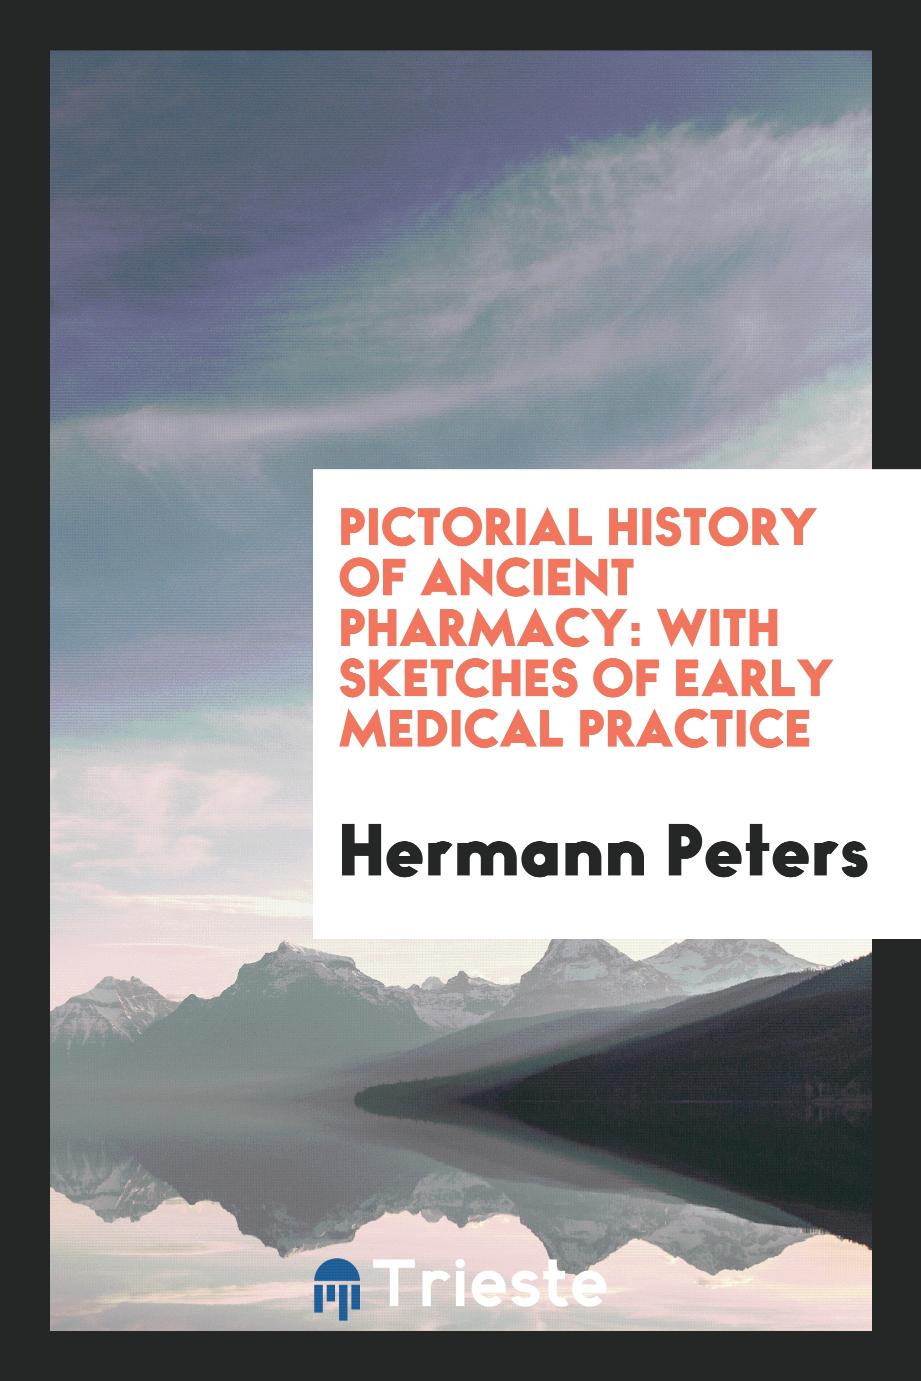 Pictorial history of ancient pharmacy: with sketches of early medical practice